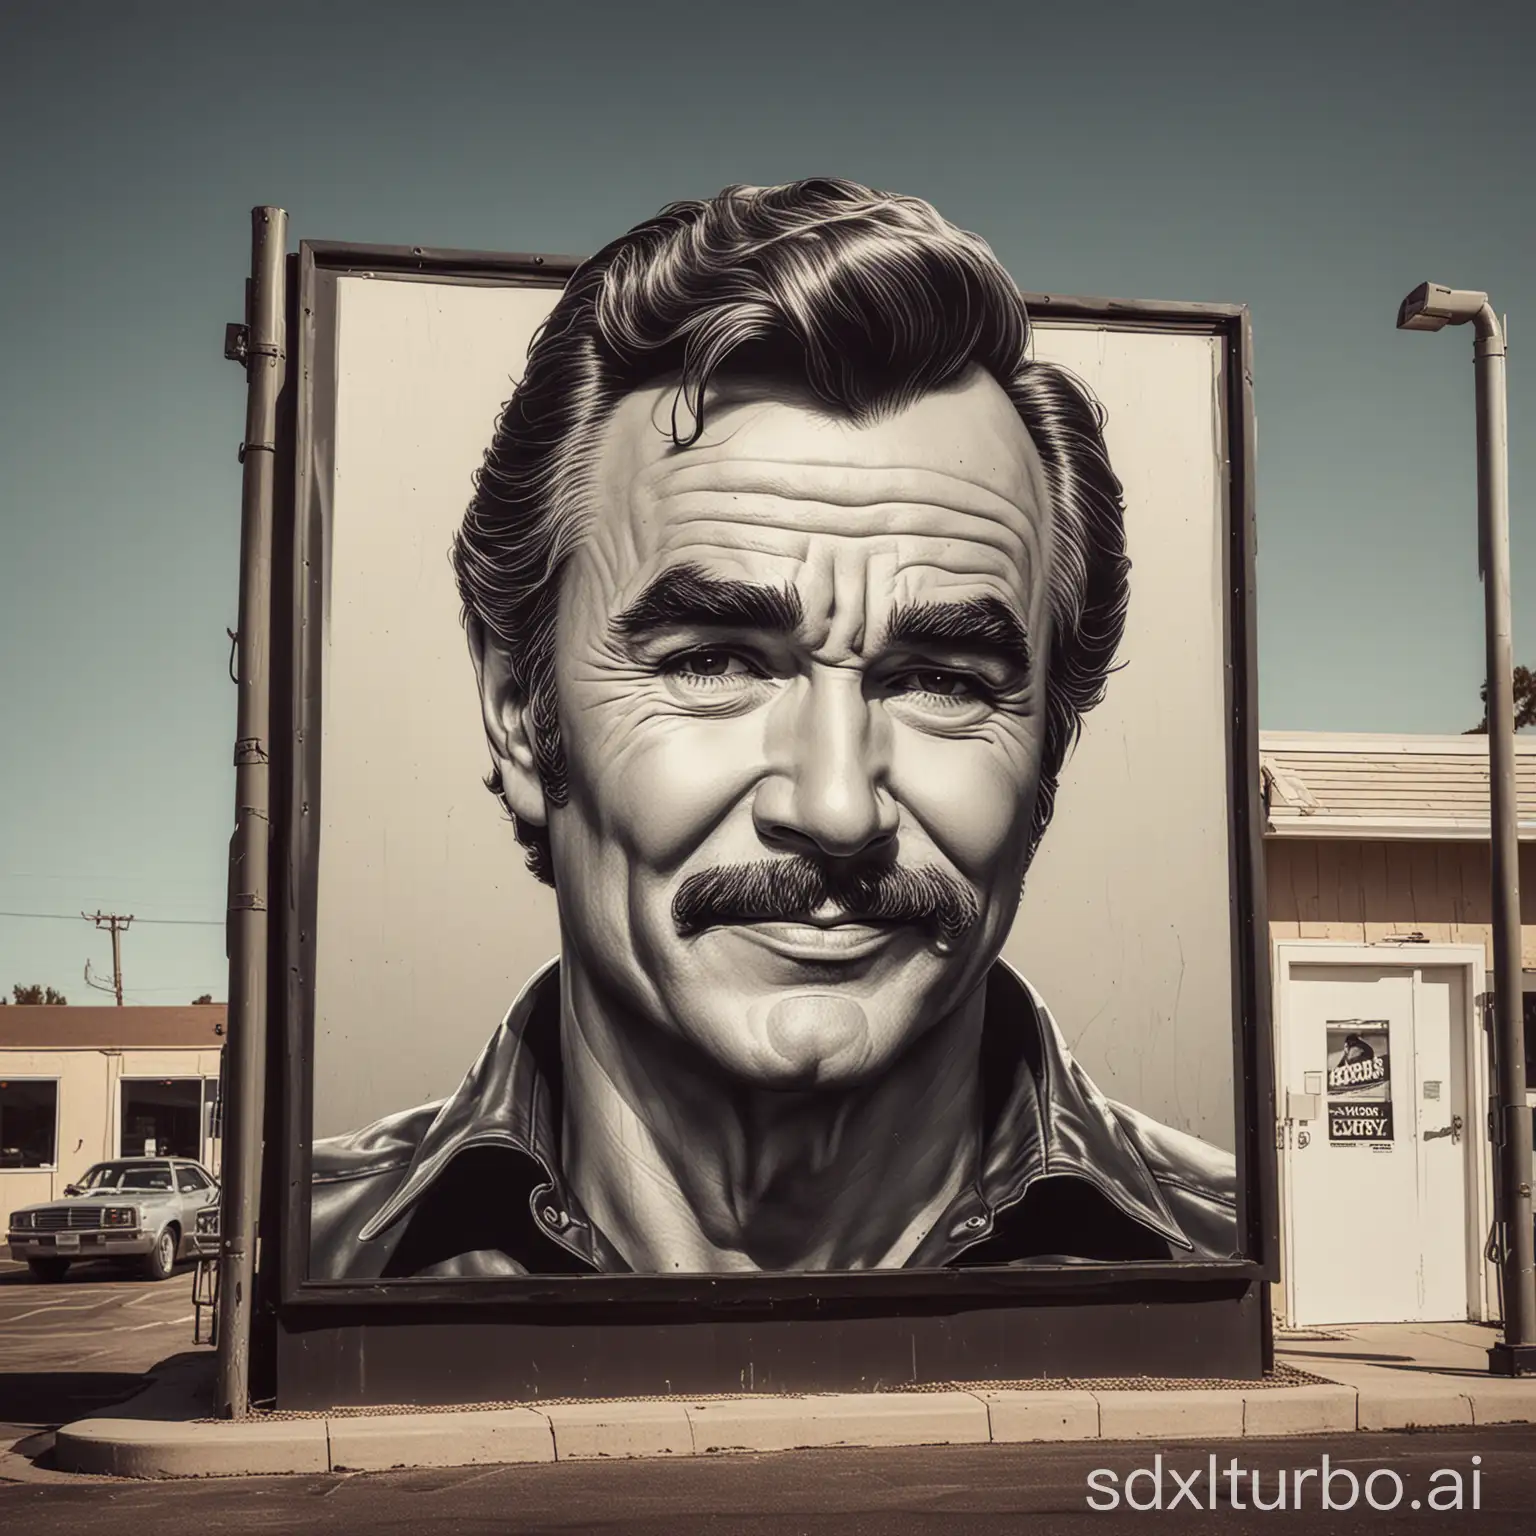 Duotone illustration of Burt Reynolds, simplified caricature, on a large backlit gas station convenience store sign